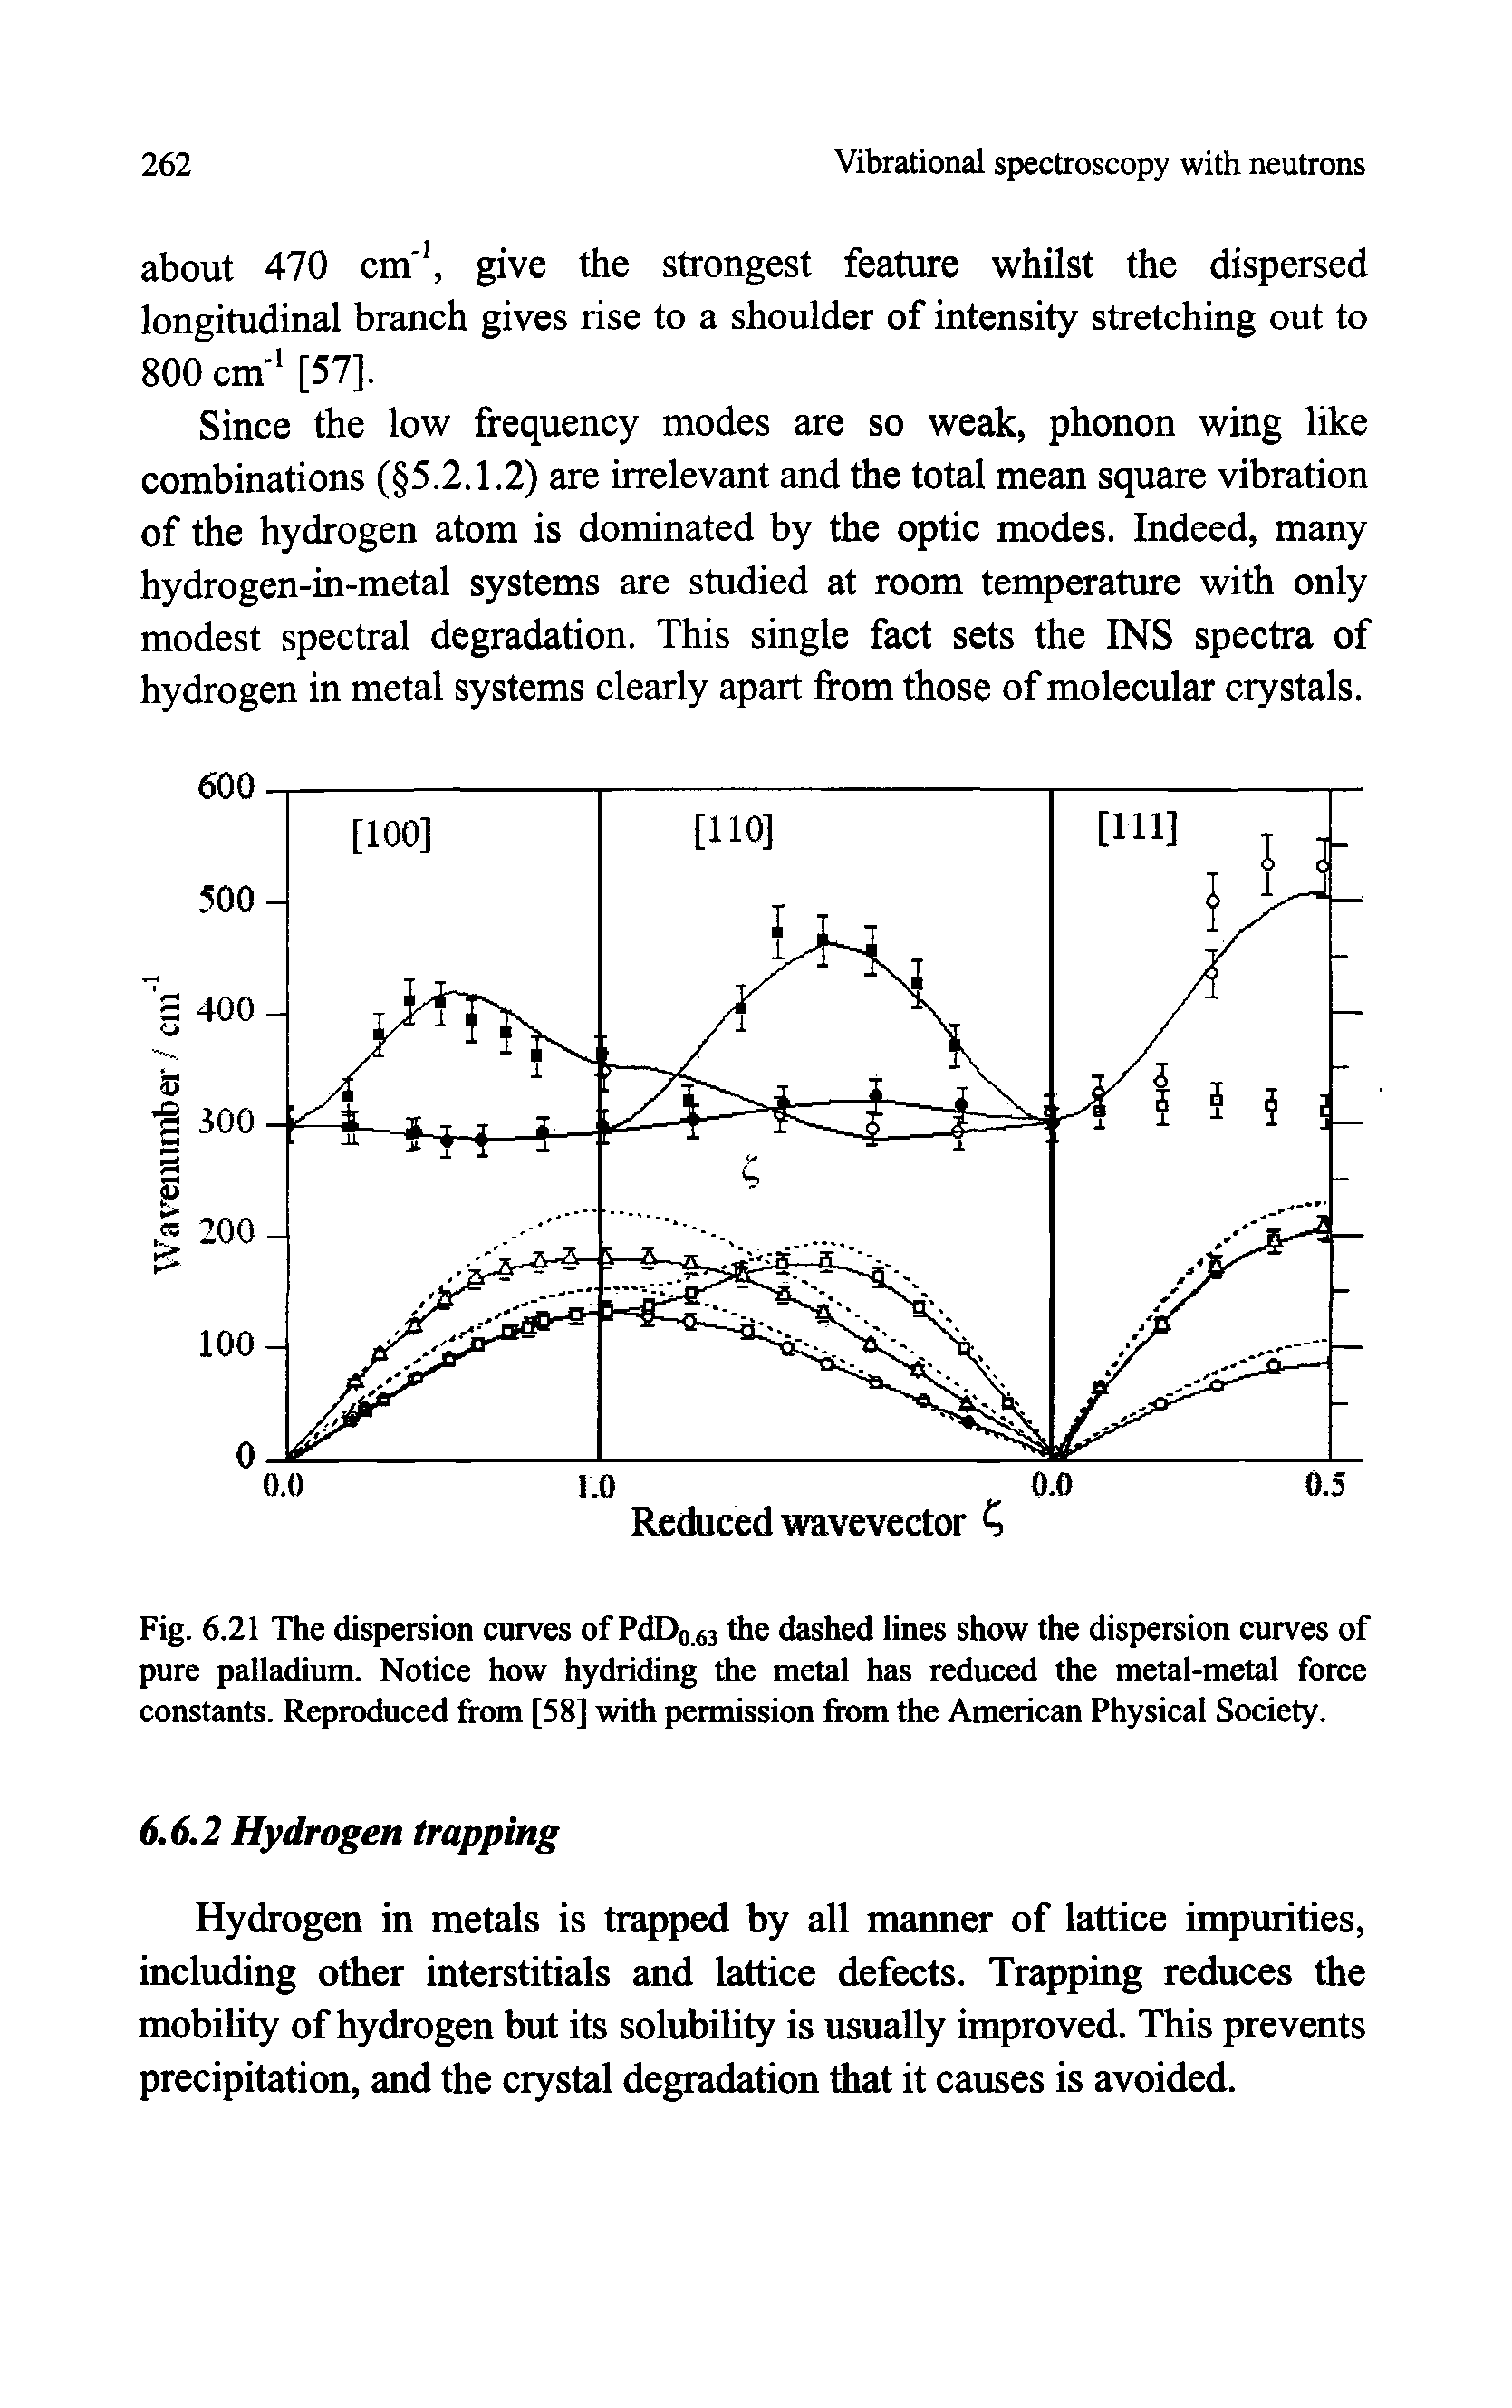 Fig. 6.21 The dispersion curves of PdDo.63 the dashed lines show the dispersion curves of pure palladium. Notice how hydriding the metal has reduced the metal-metal force constants. Reproduced from [58] with permission from the American Physical Society.